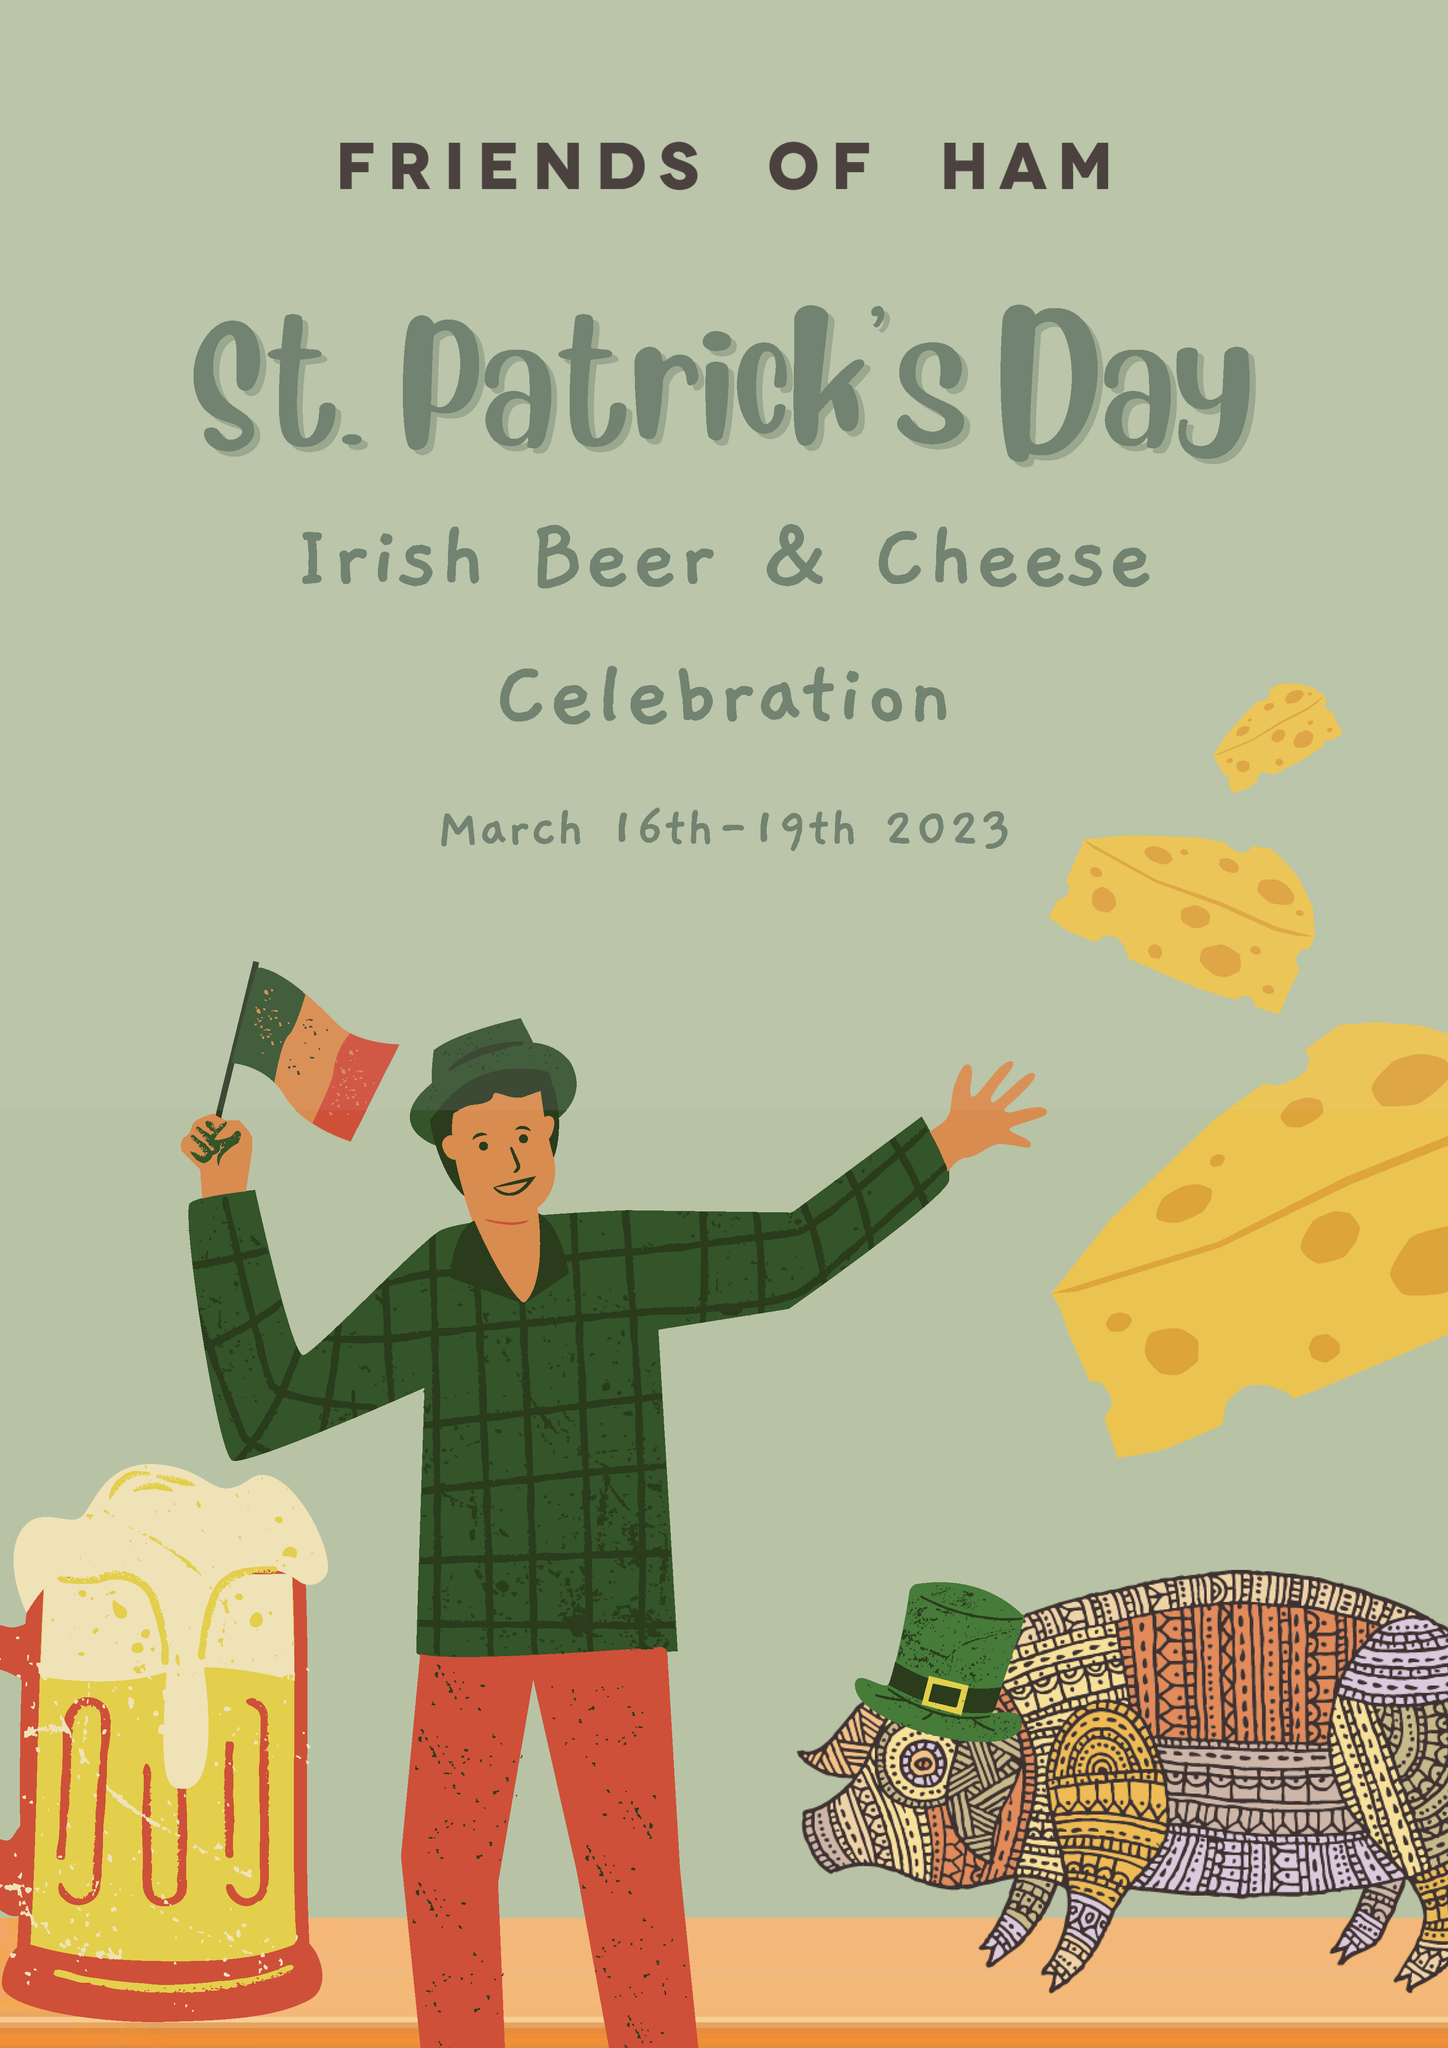 join us at friends of ham leeds this st patrick's day for an assortment of irish food and drink specials